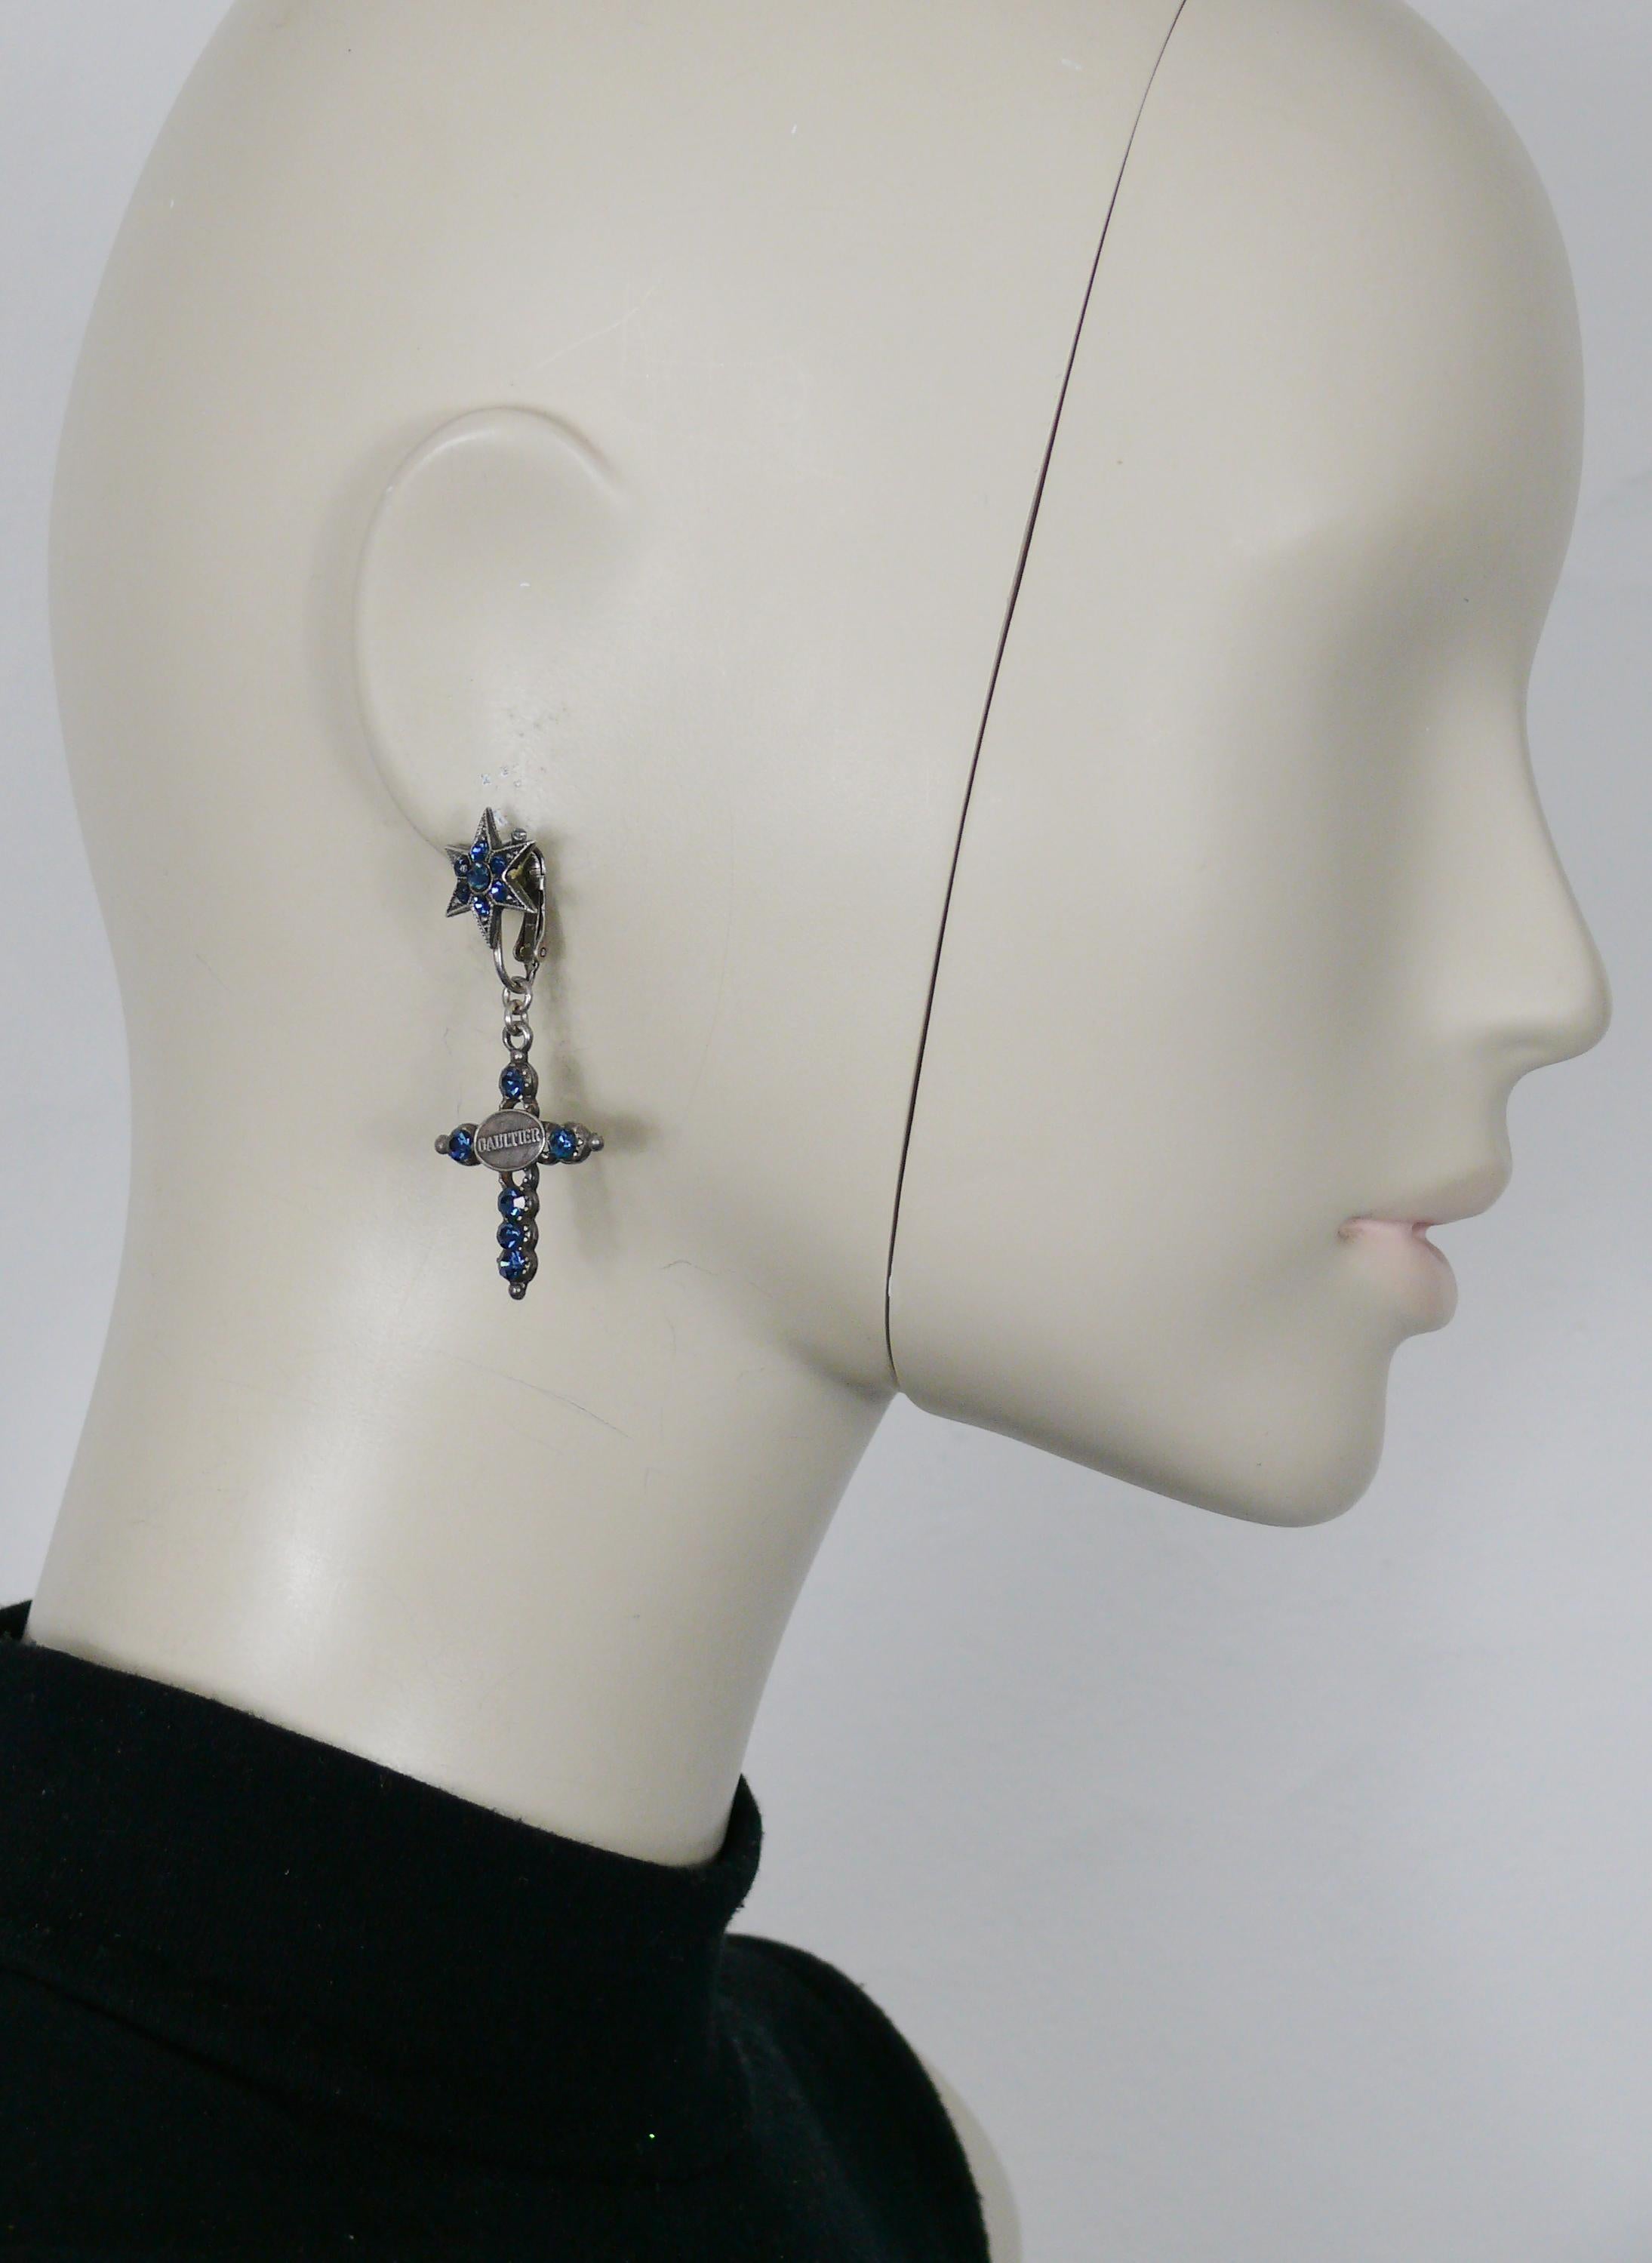 JEAN PAUL GAULTIER  vintage gun patina dangling earrings (clip-on) featuring a cross topped by a star embellished with blue crystals.

Marked GAULTIER.

Indicative measurements : max. height approx. 5.5 cm (2.17 inches) / max. width approx. 2 cm